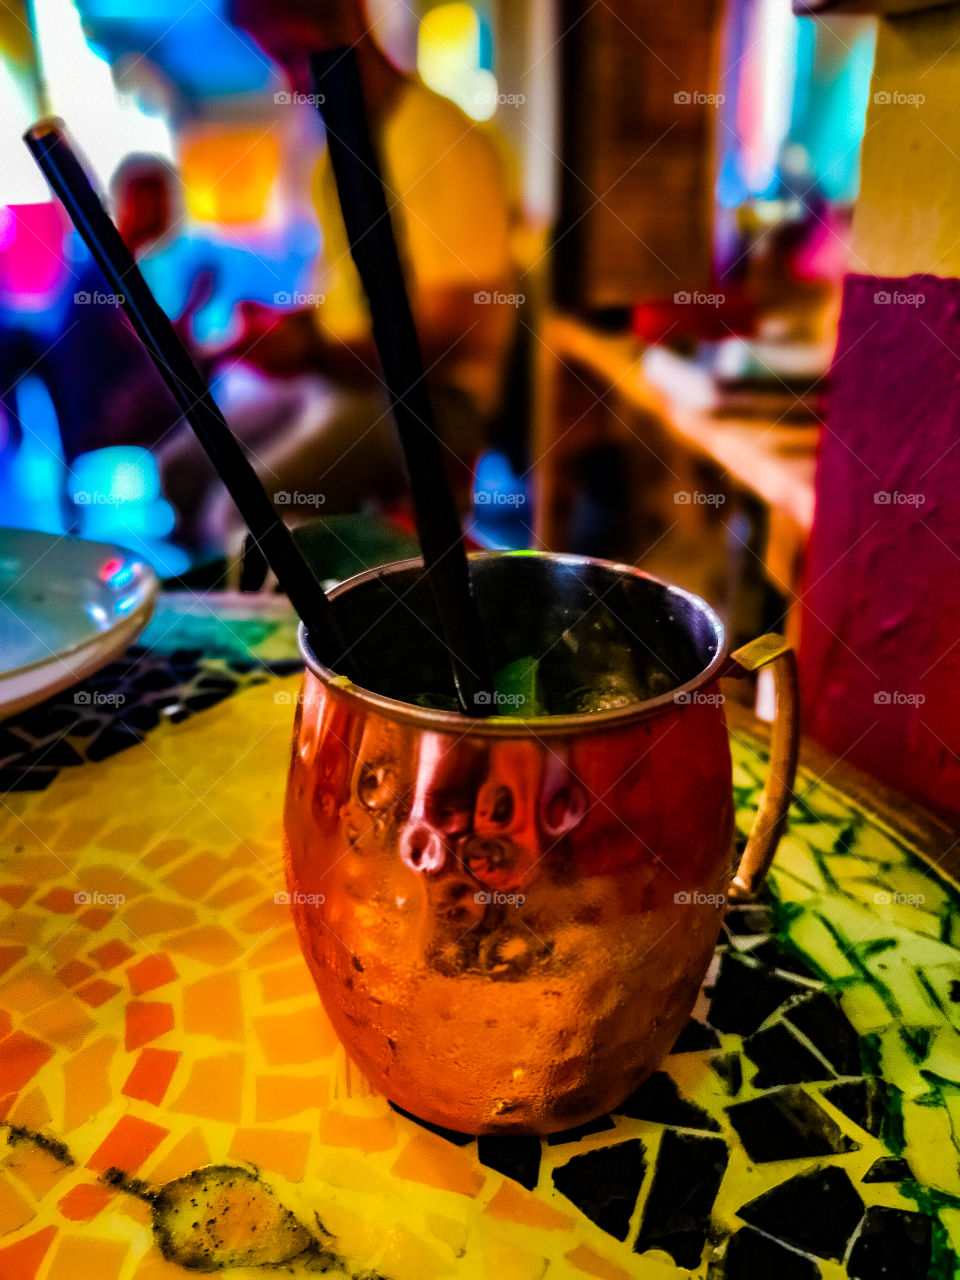 Just a Moscow mule